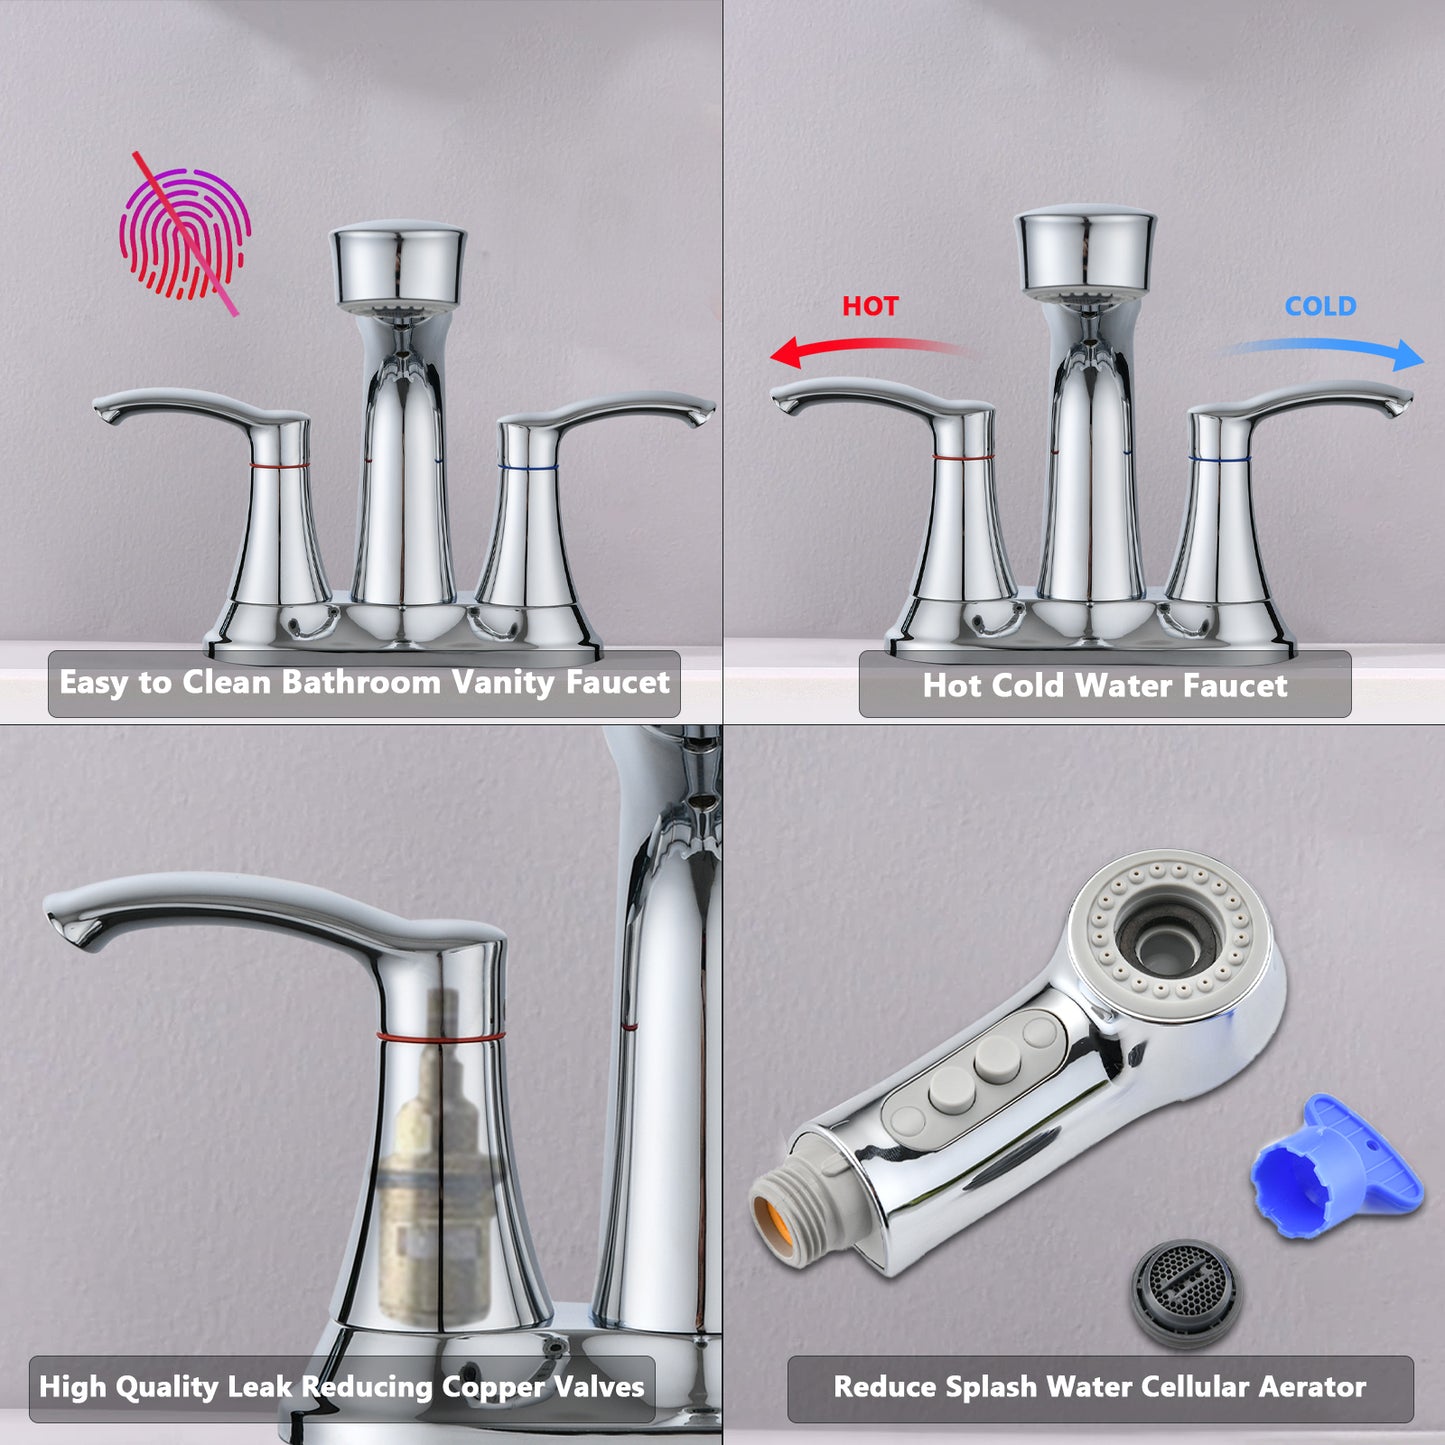 Bathroom Chrome Centerset Faucet with Pull-Out Sprayer